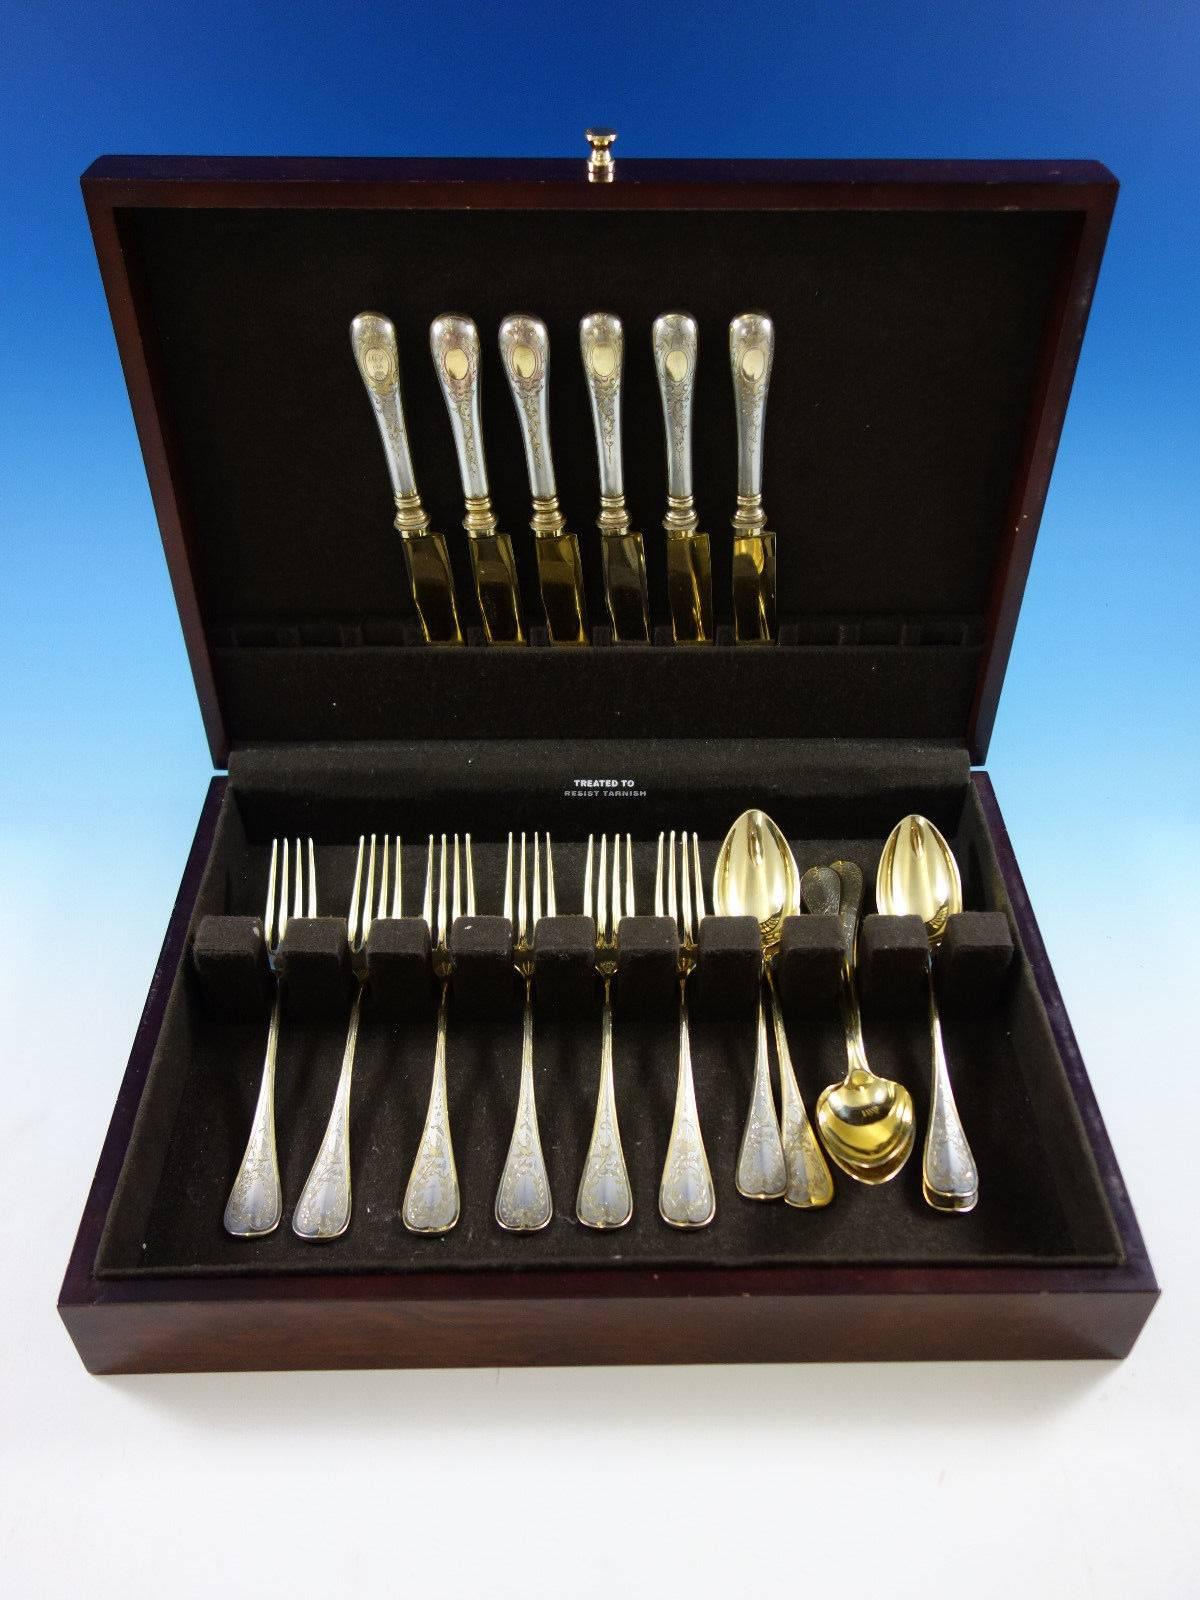 Unusual partial-gilt German 800 silver dessert set with bird, wreath and bow motif 18 pieces. This set includes:

Six dessert knives, 8 1/4